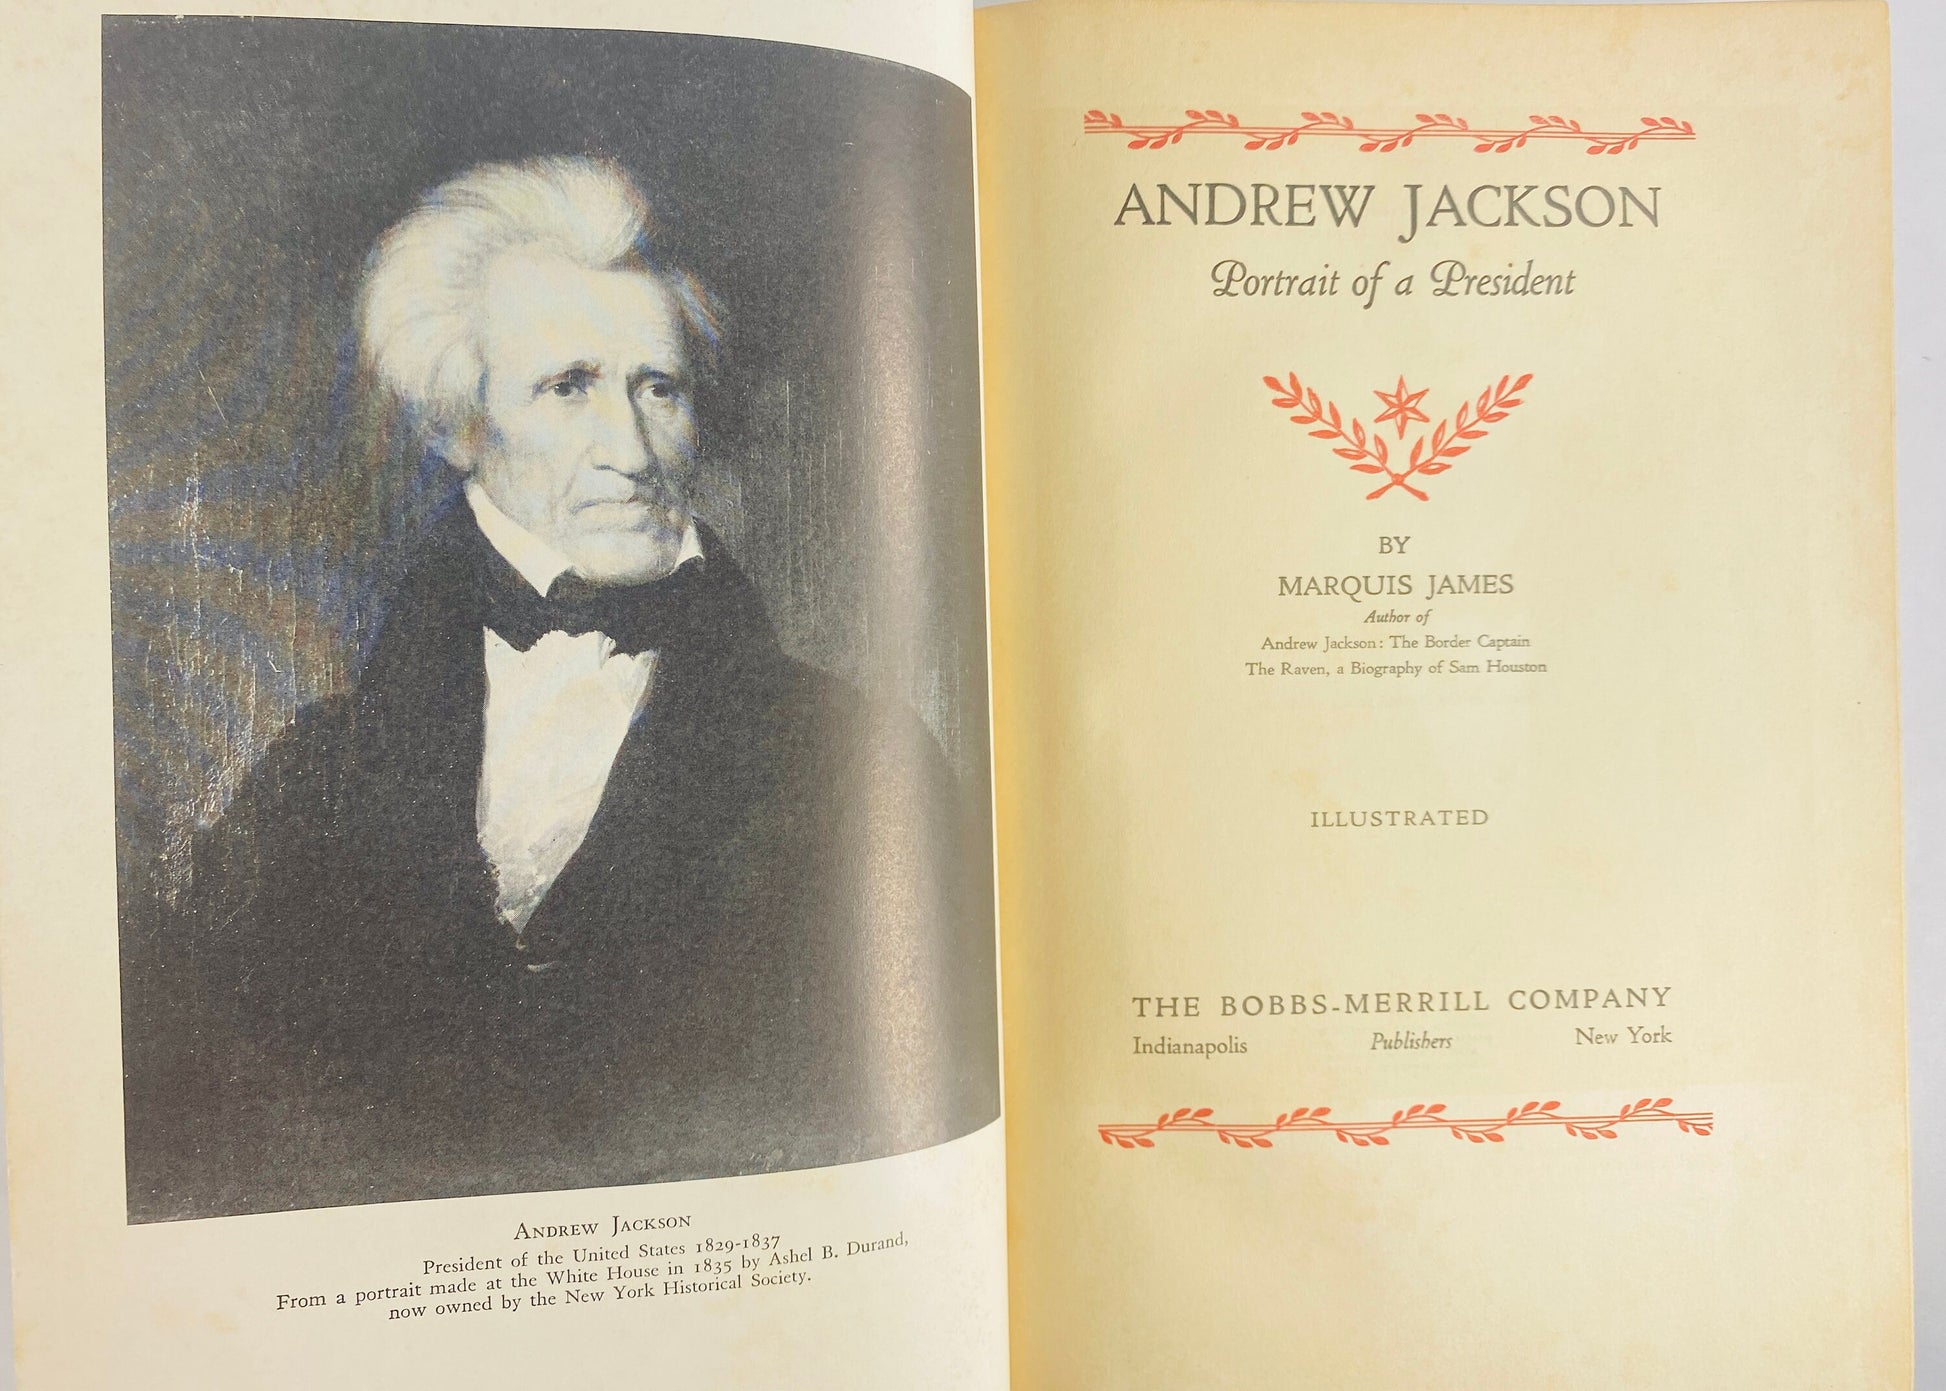 Andrew Jackson Portrait of a President militiary history Patriot FIRST EDITION vintage book circa 1937 Marquis James biography of Red Eagle